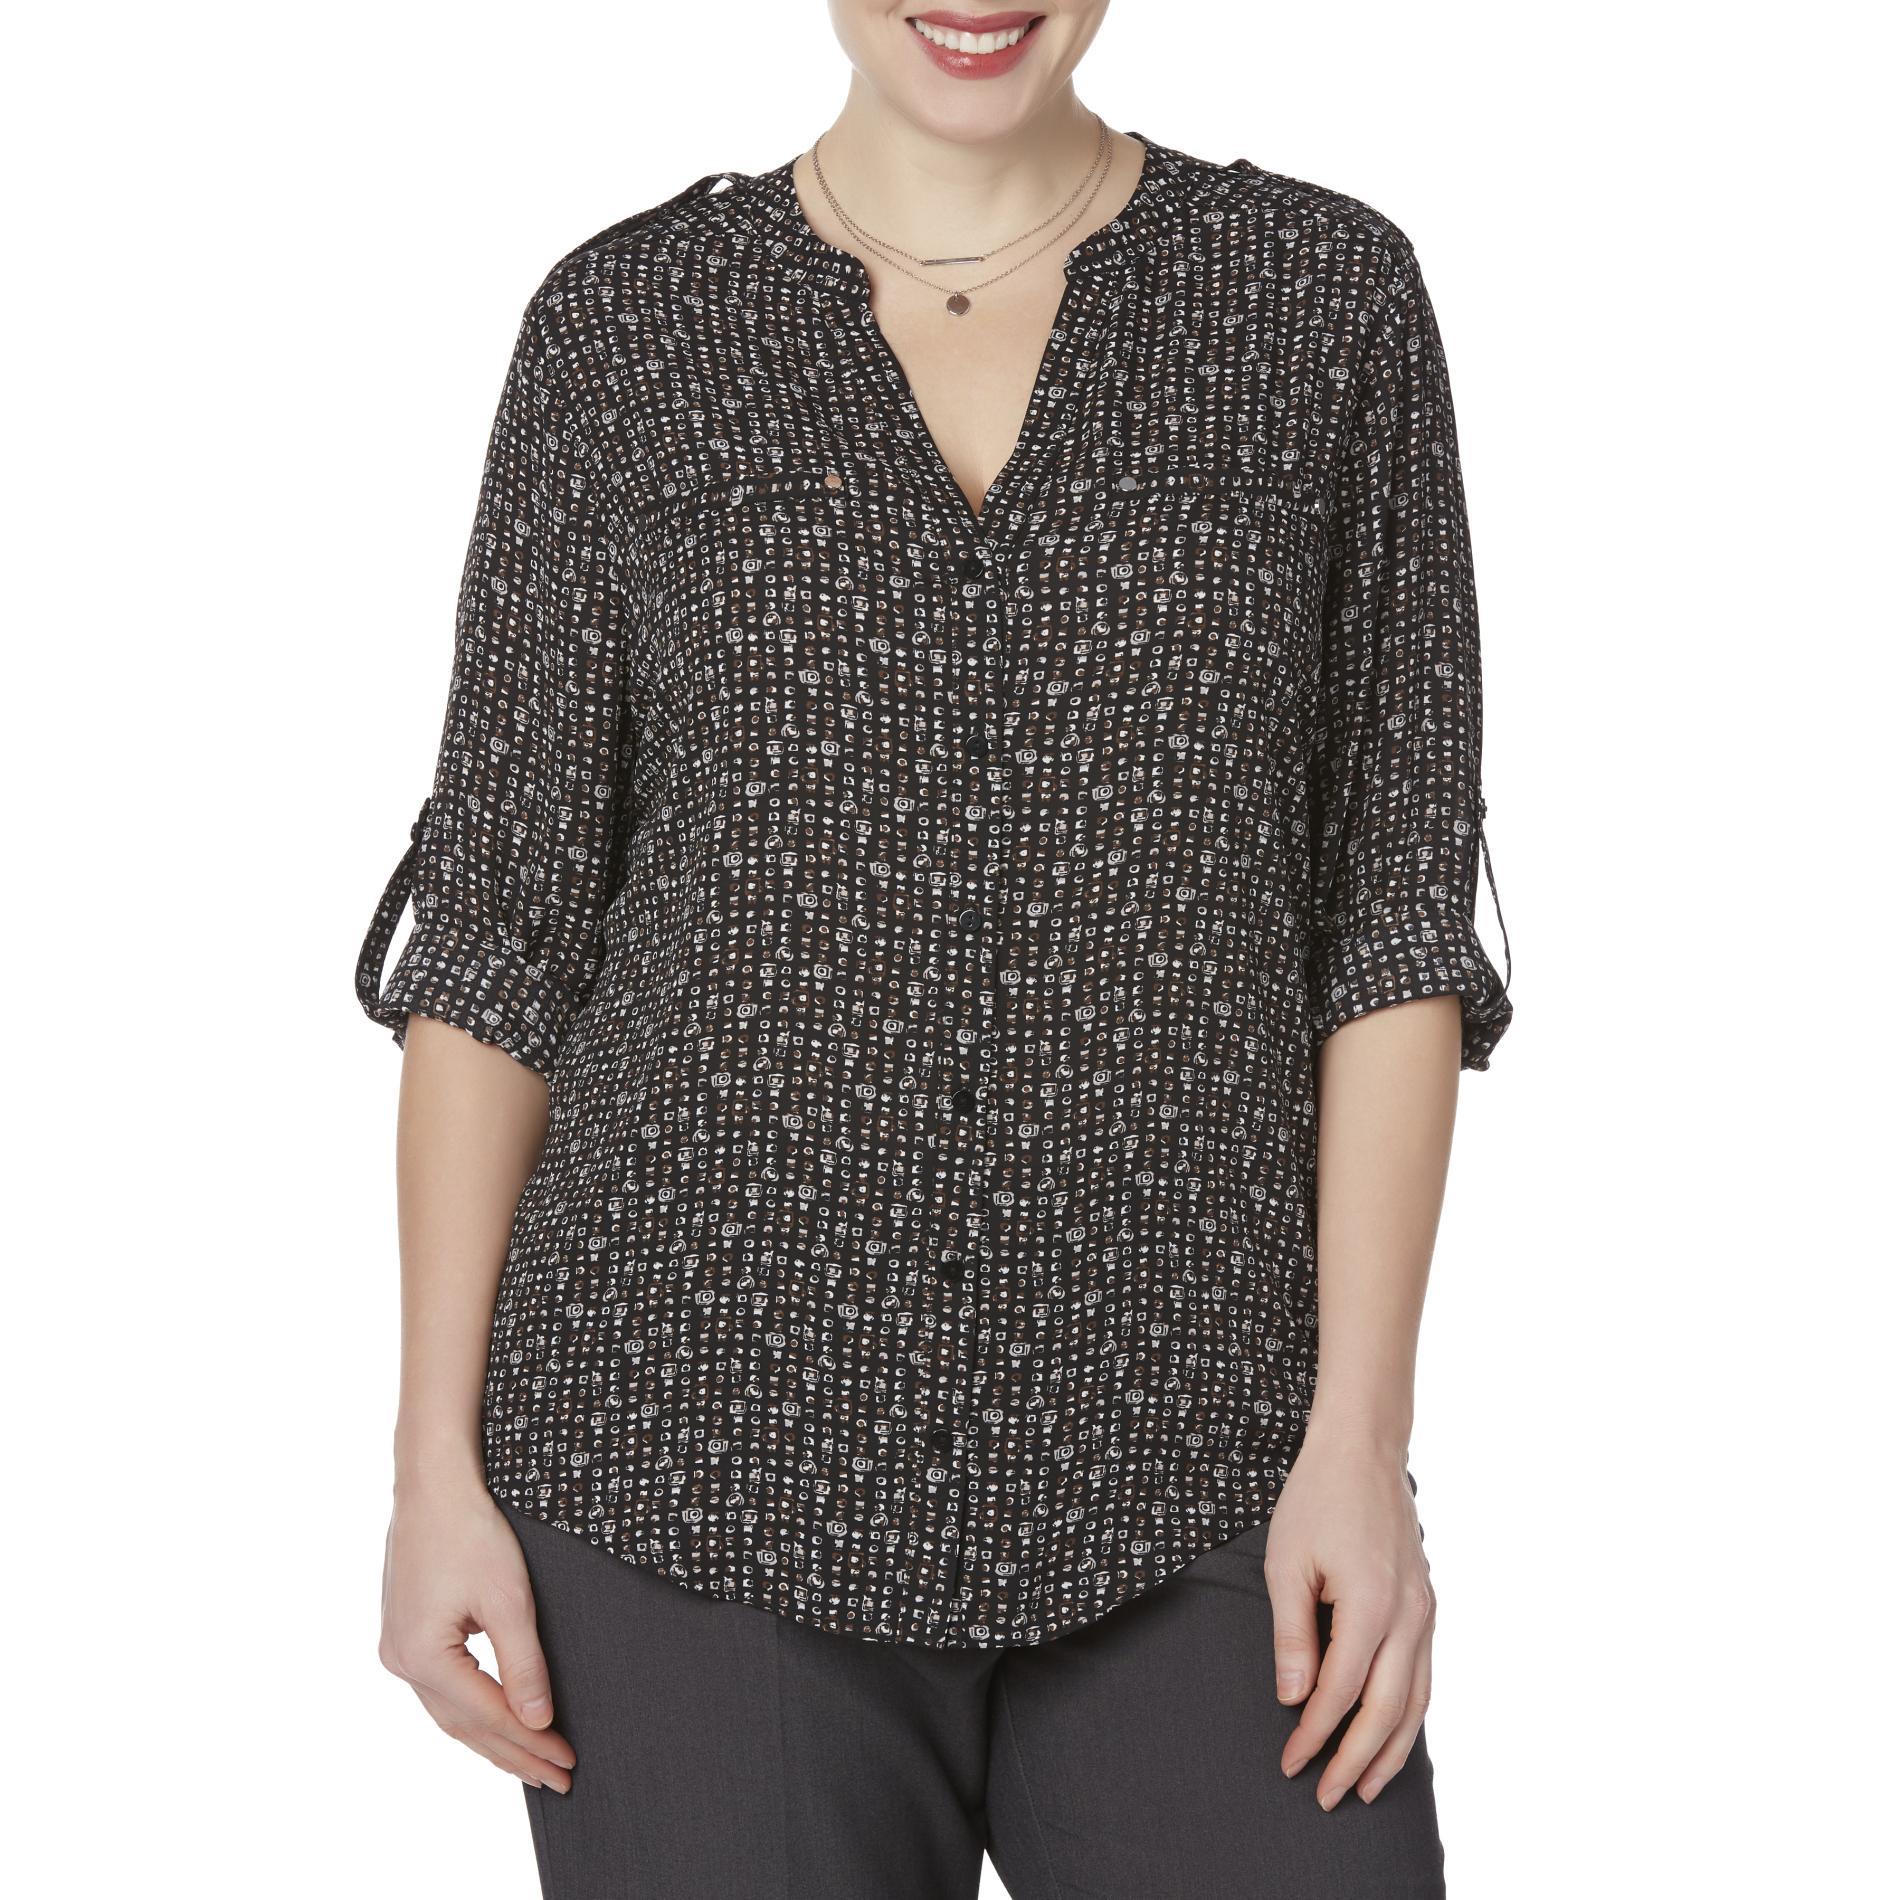 Simply Emma Women's Plus Blouse - Abstract